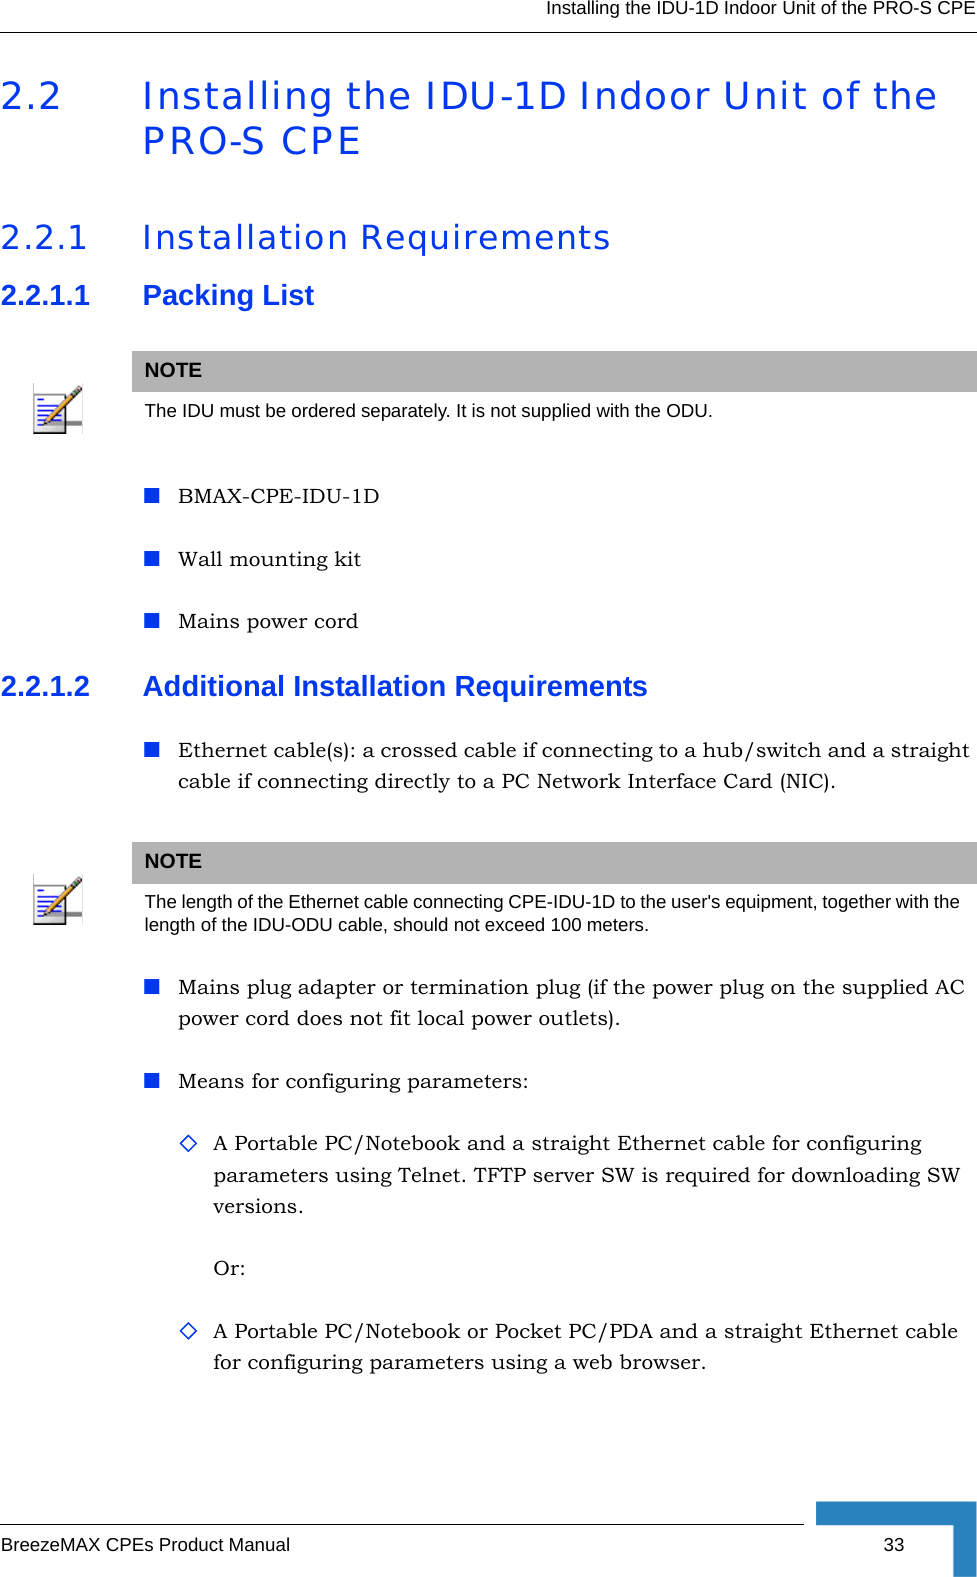 Installing the IDU-1D Indoor Unit of the PRO-S CPEBreezeMAX CPEs Product Manual 332.2 Installing the IDU-1D Indoor Unit of the PRO-S CPE2.2.1 Installation Requirements2.2.1.1 Packing ListBMAX-CPE-IDU-1D Wall mounting kit Mains power cord2.2.1.2 Additional Installation RequirementsEthernet cable(s): a crossed cable if connecting to a hub/switch and a straight cable if connecting directly to a PC Network Interface Card (NIC).Mains plug adapter or termination plug (if the power plug on the supplied AC power cord does not fit local power outlets).Means for configuring parameters: A Portable PC/Notebook and a straight Ethernet cable for configuring parameters using Telnet. TFTP server SW is required for downloading SW versions.Or:A Portable PC/Notebook or Pocket PC/PDA and a straight Ethernet cable for configuring parameters using a web browser. NOTEThe IDU must be ordered separately. It is not supplied with the ODU.NOTEThe length of the Ethernet cable connecting CPE-IDU-1D to the user&apos;s equipment, together with the length of the IDU-ODU cable, should not exceed 100 meters.